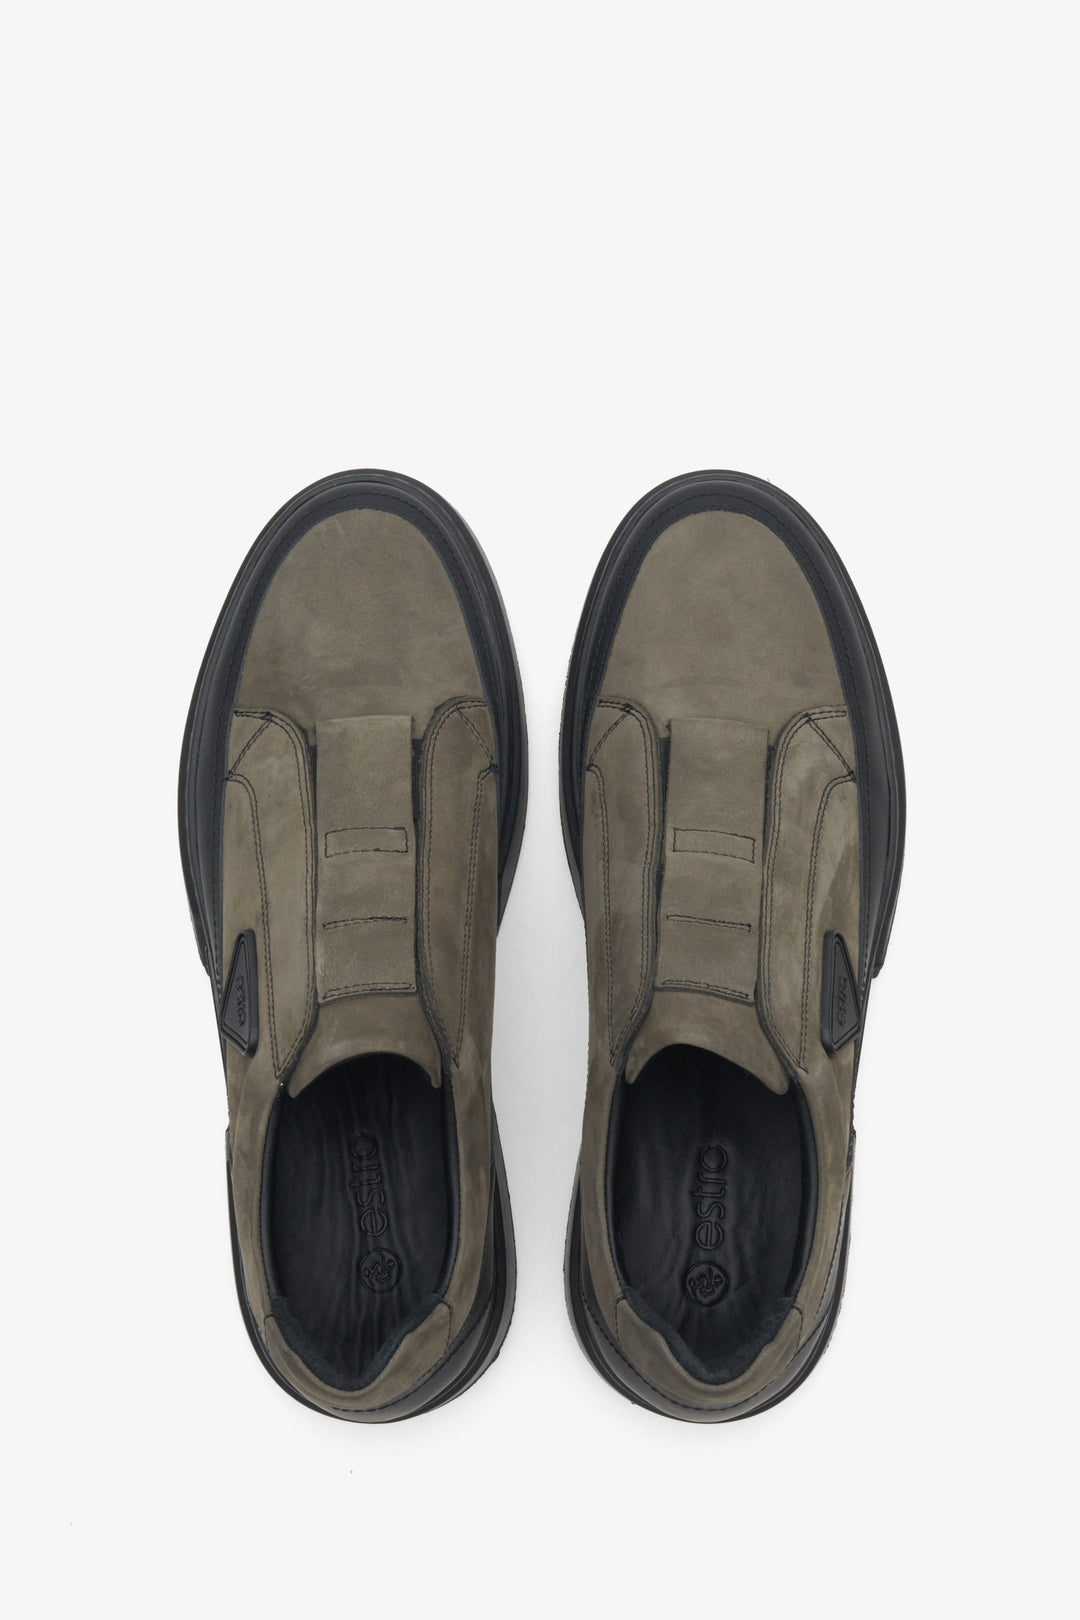 Green men's slip-on sneakers made of natural nubuck by Estro - top view presentation of the model.